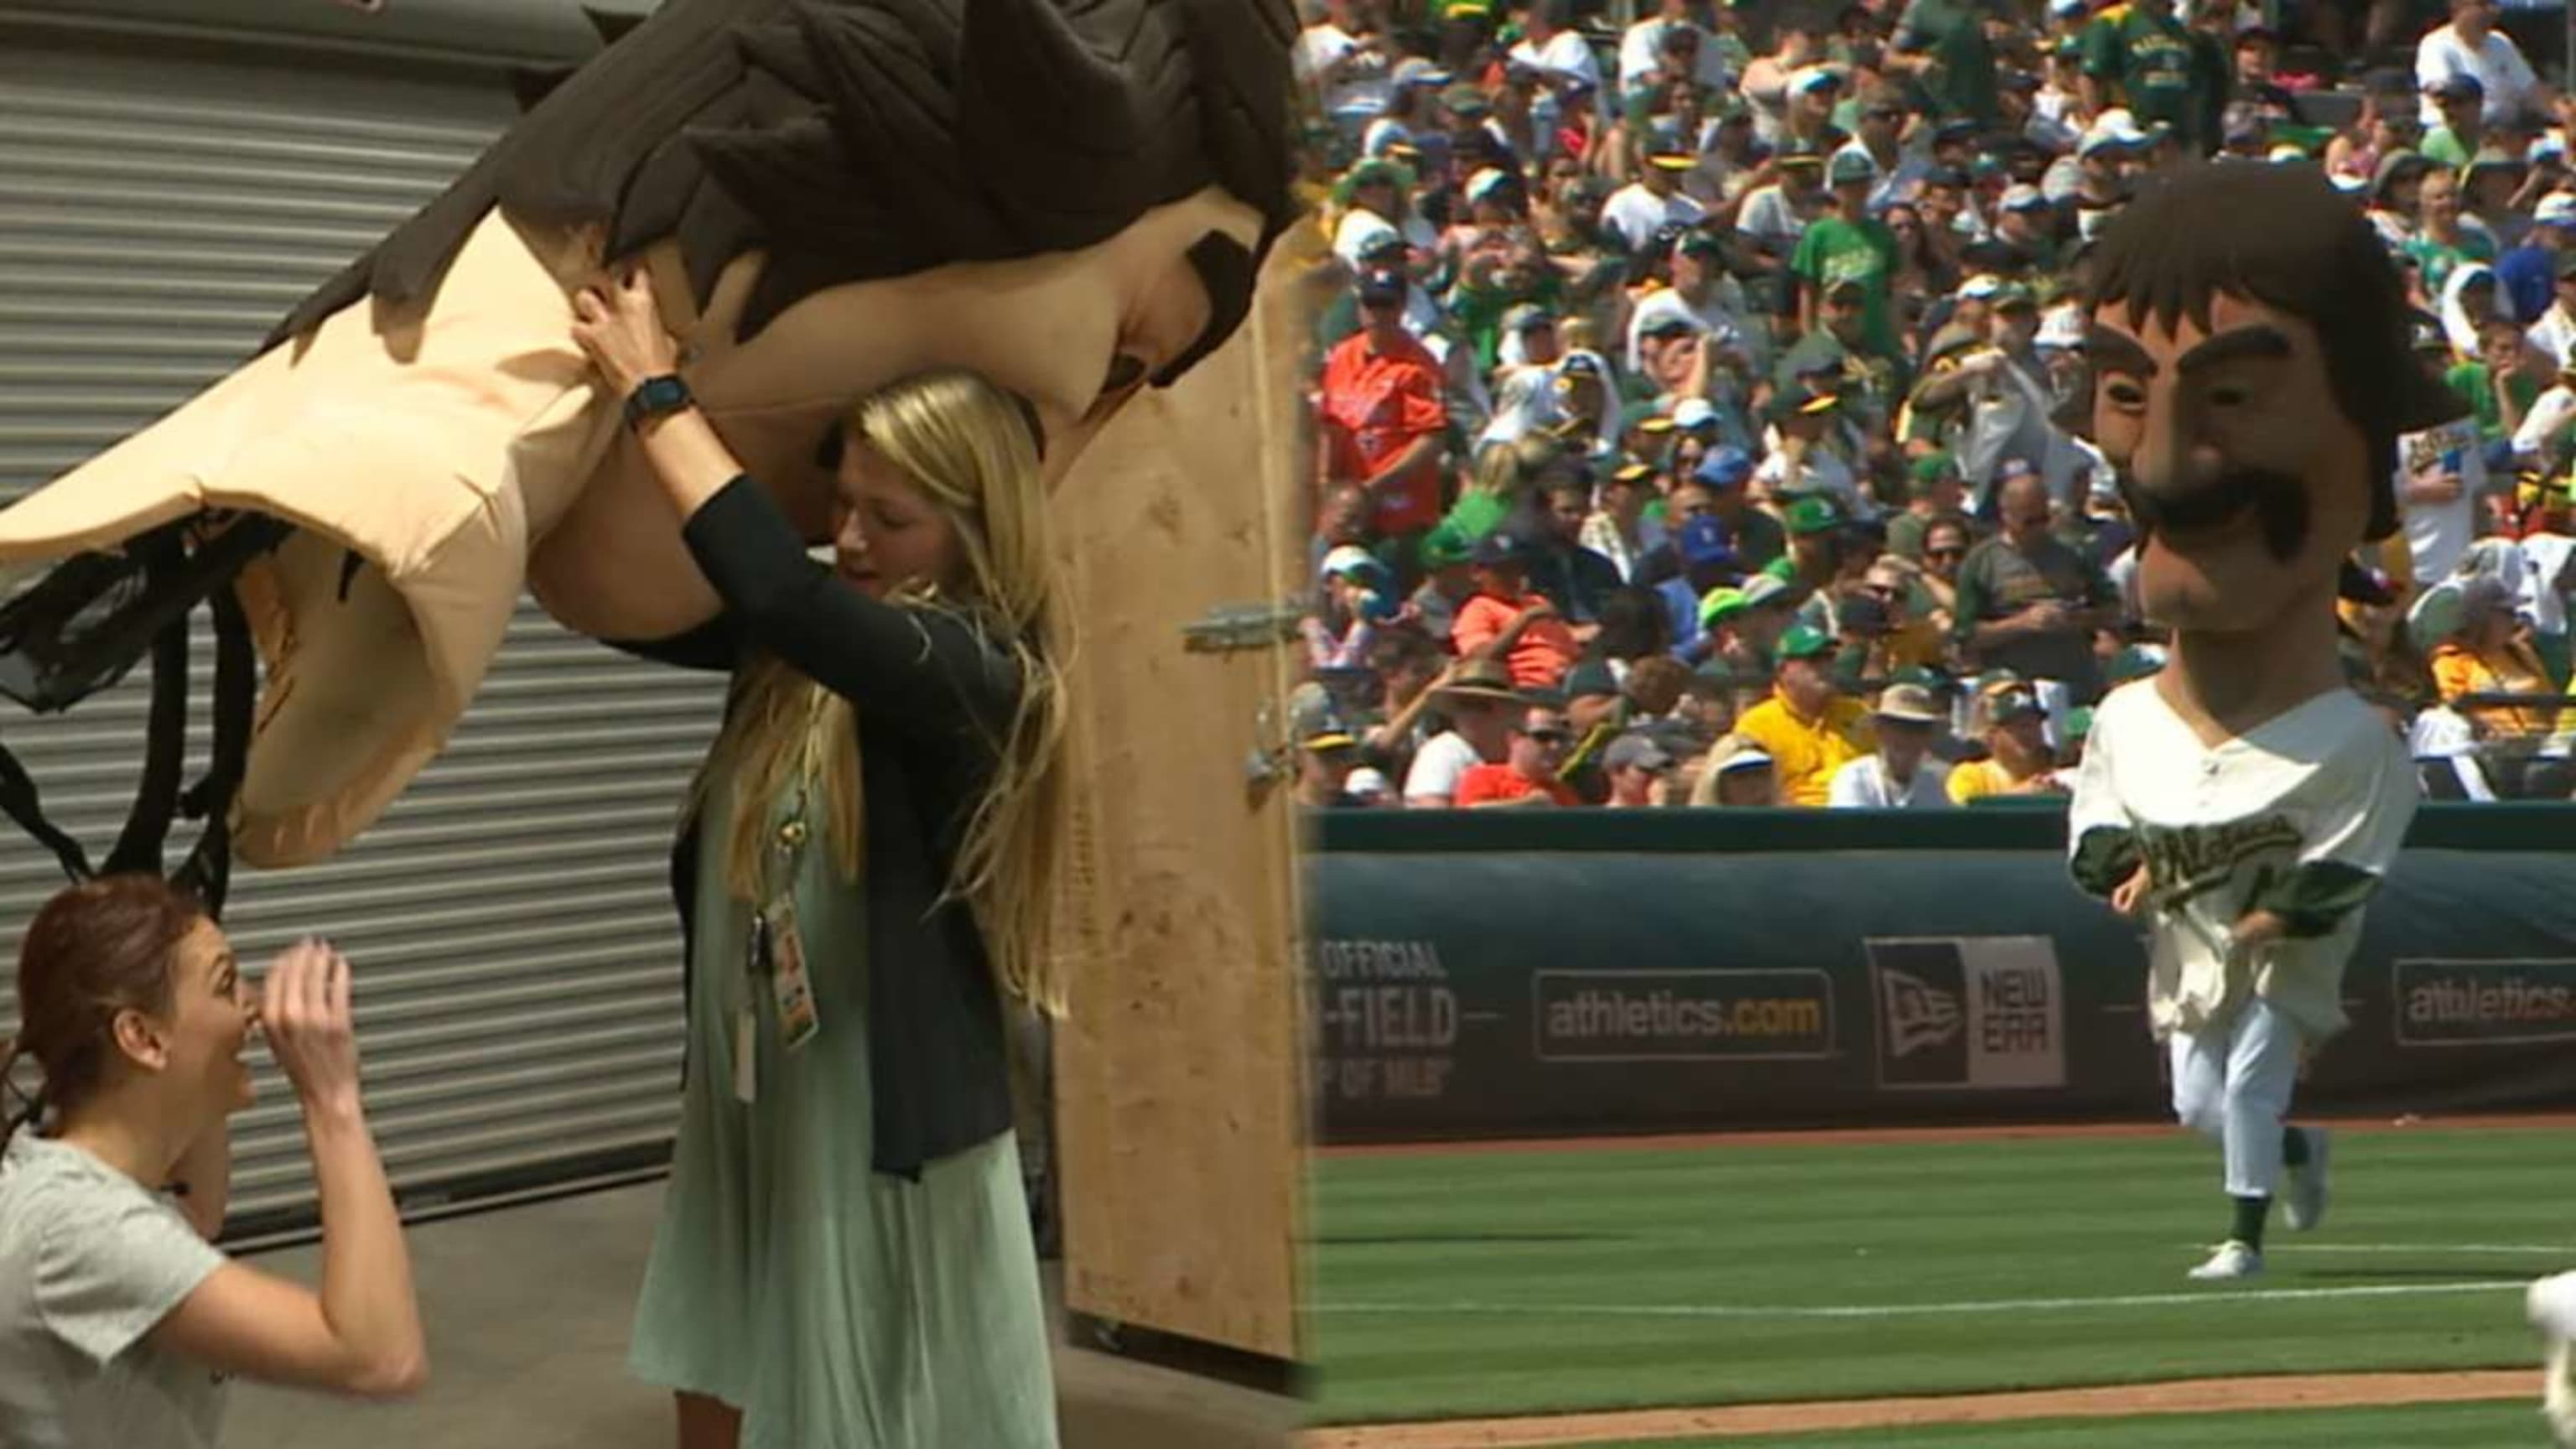 Astros reporter Julia Morales ran the A's mascot race in an oversized  Dennis Eckersley costume